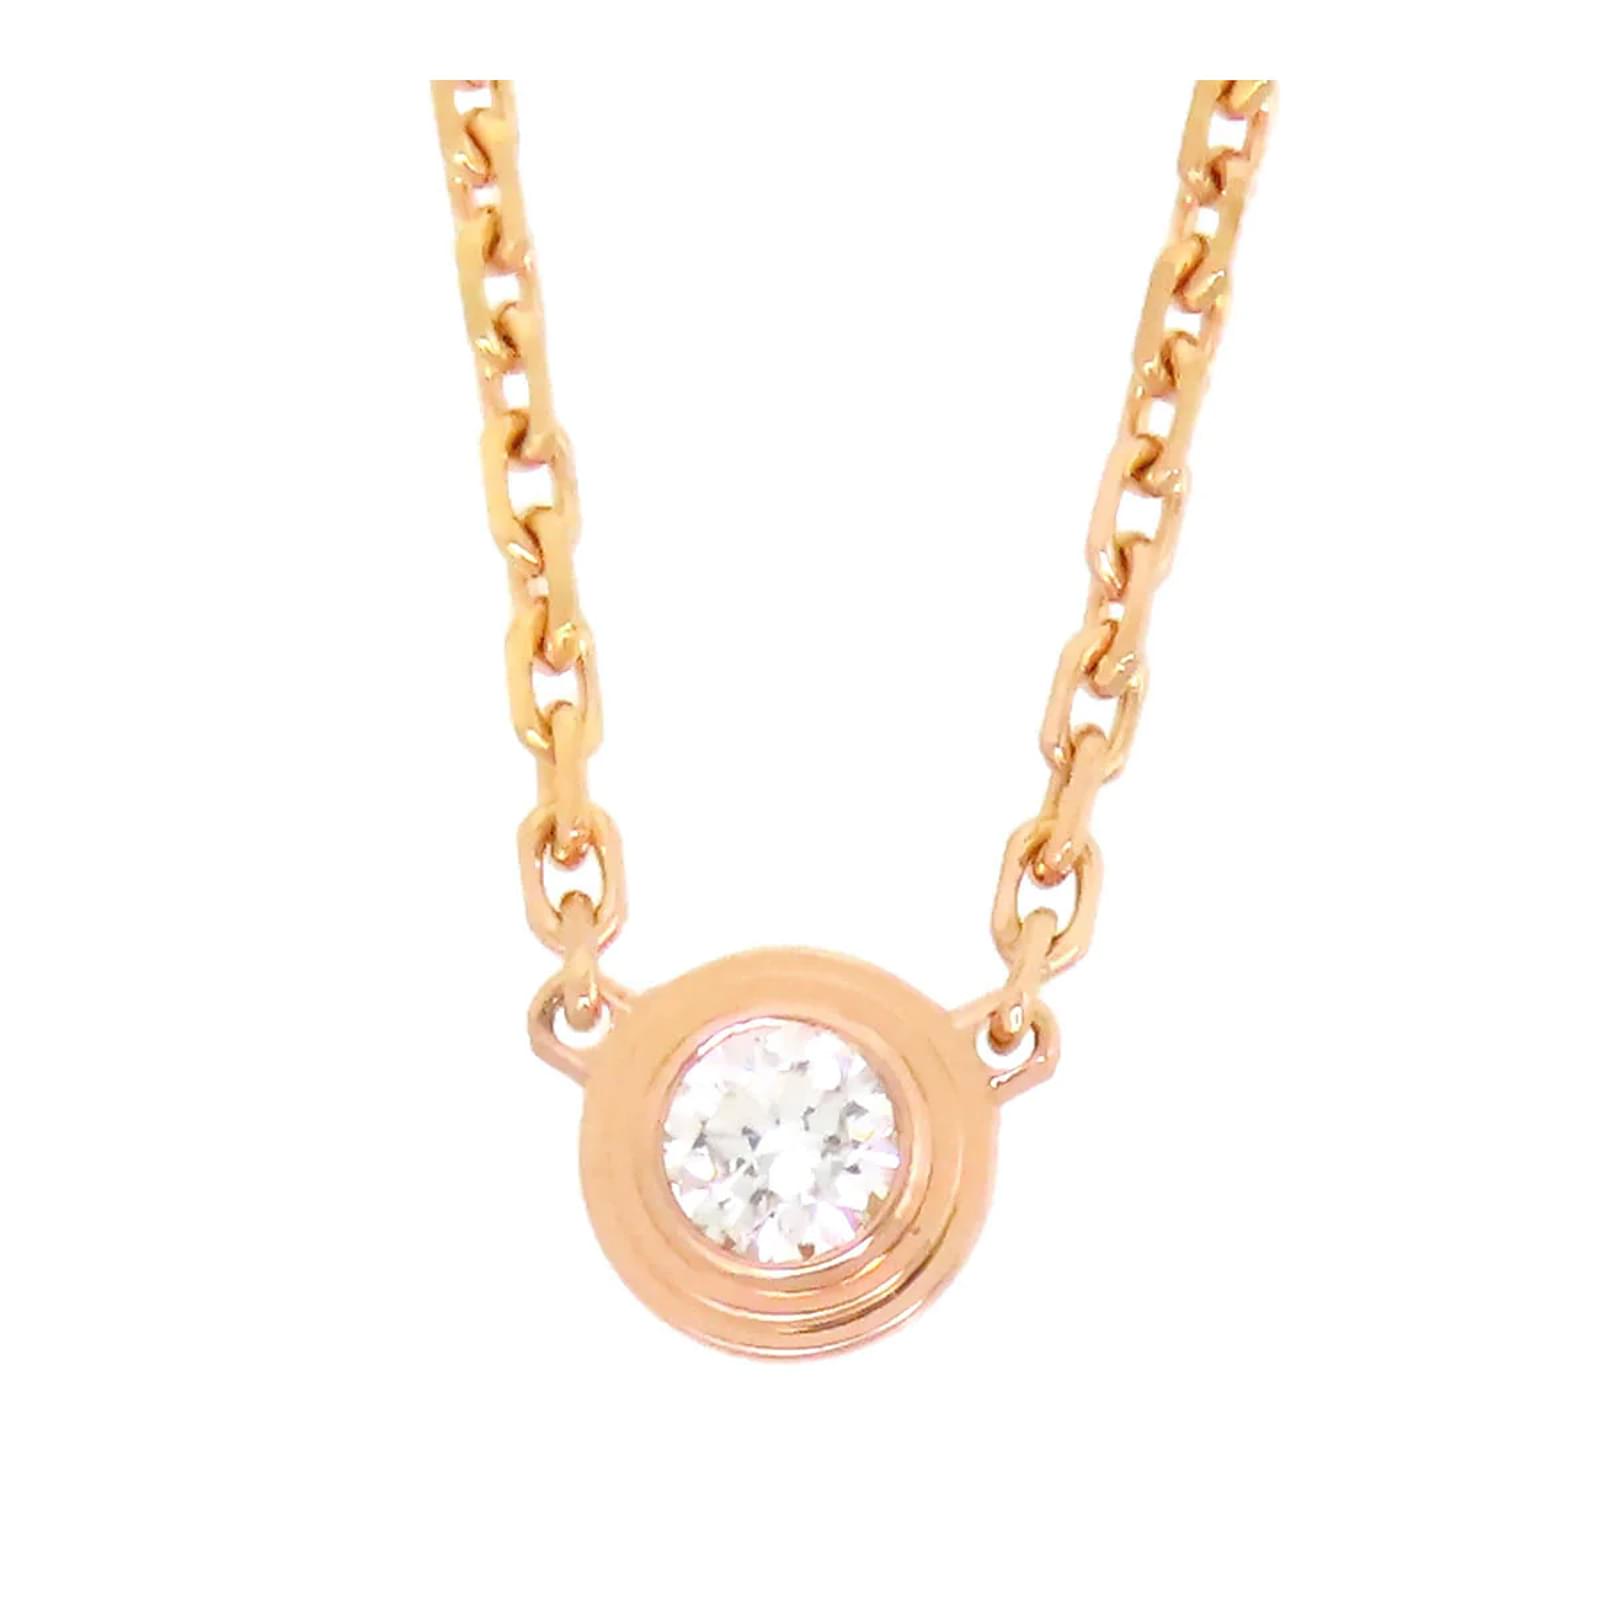 Shop Cartier 2022 SS Cartier d'Amour necklace, large model (B7215400) by  BabyYuu | BUYMA